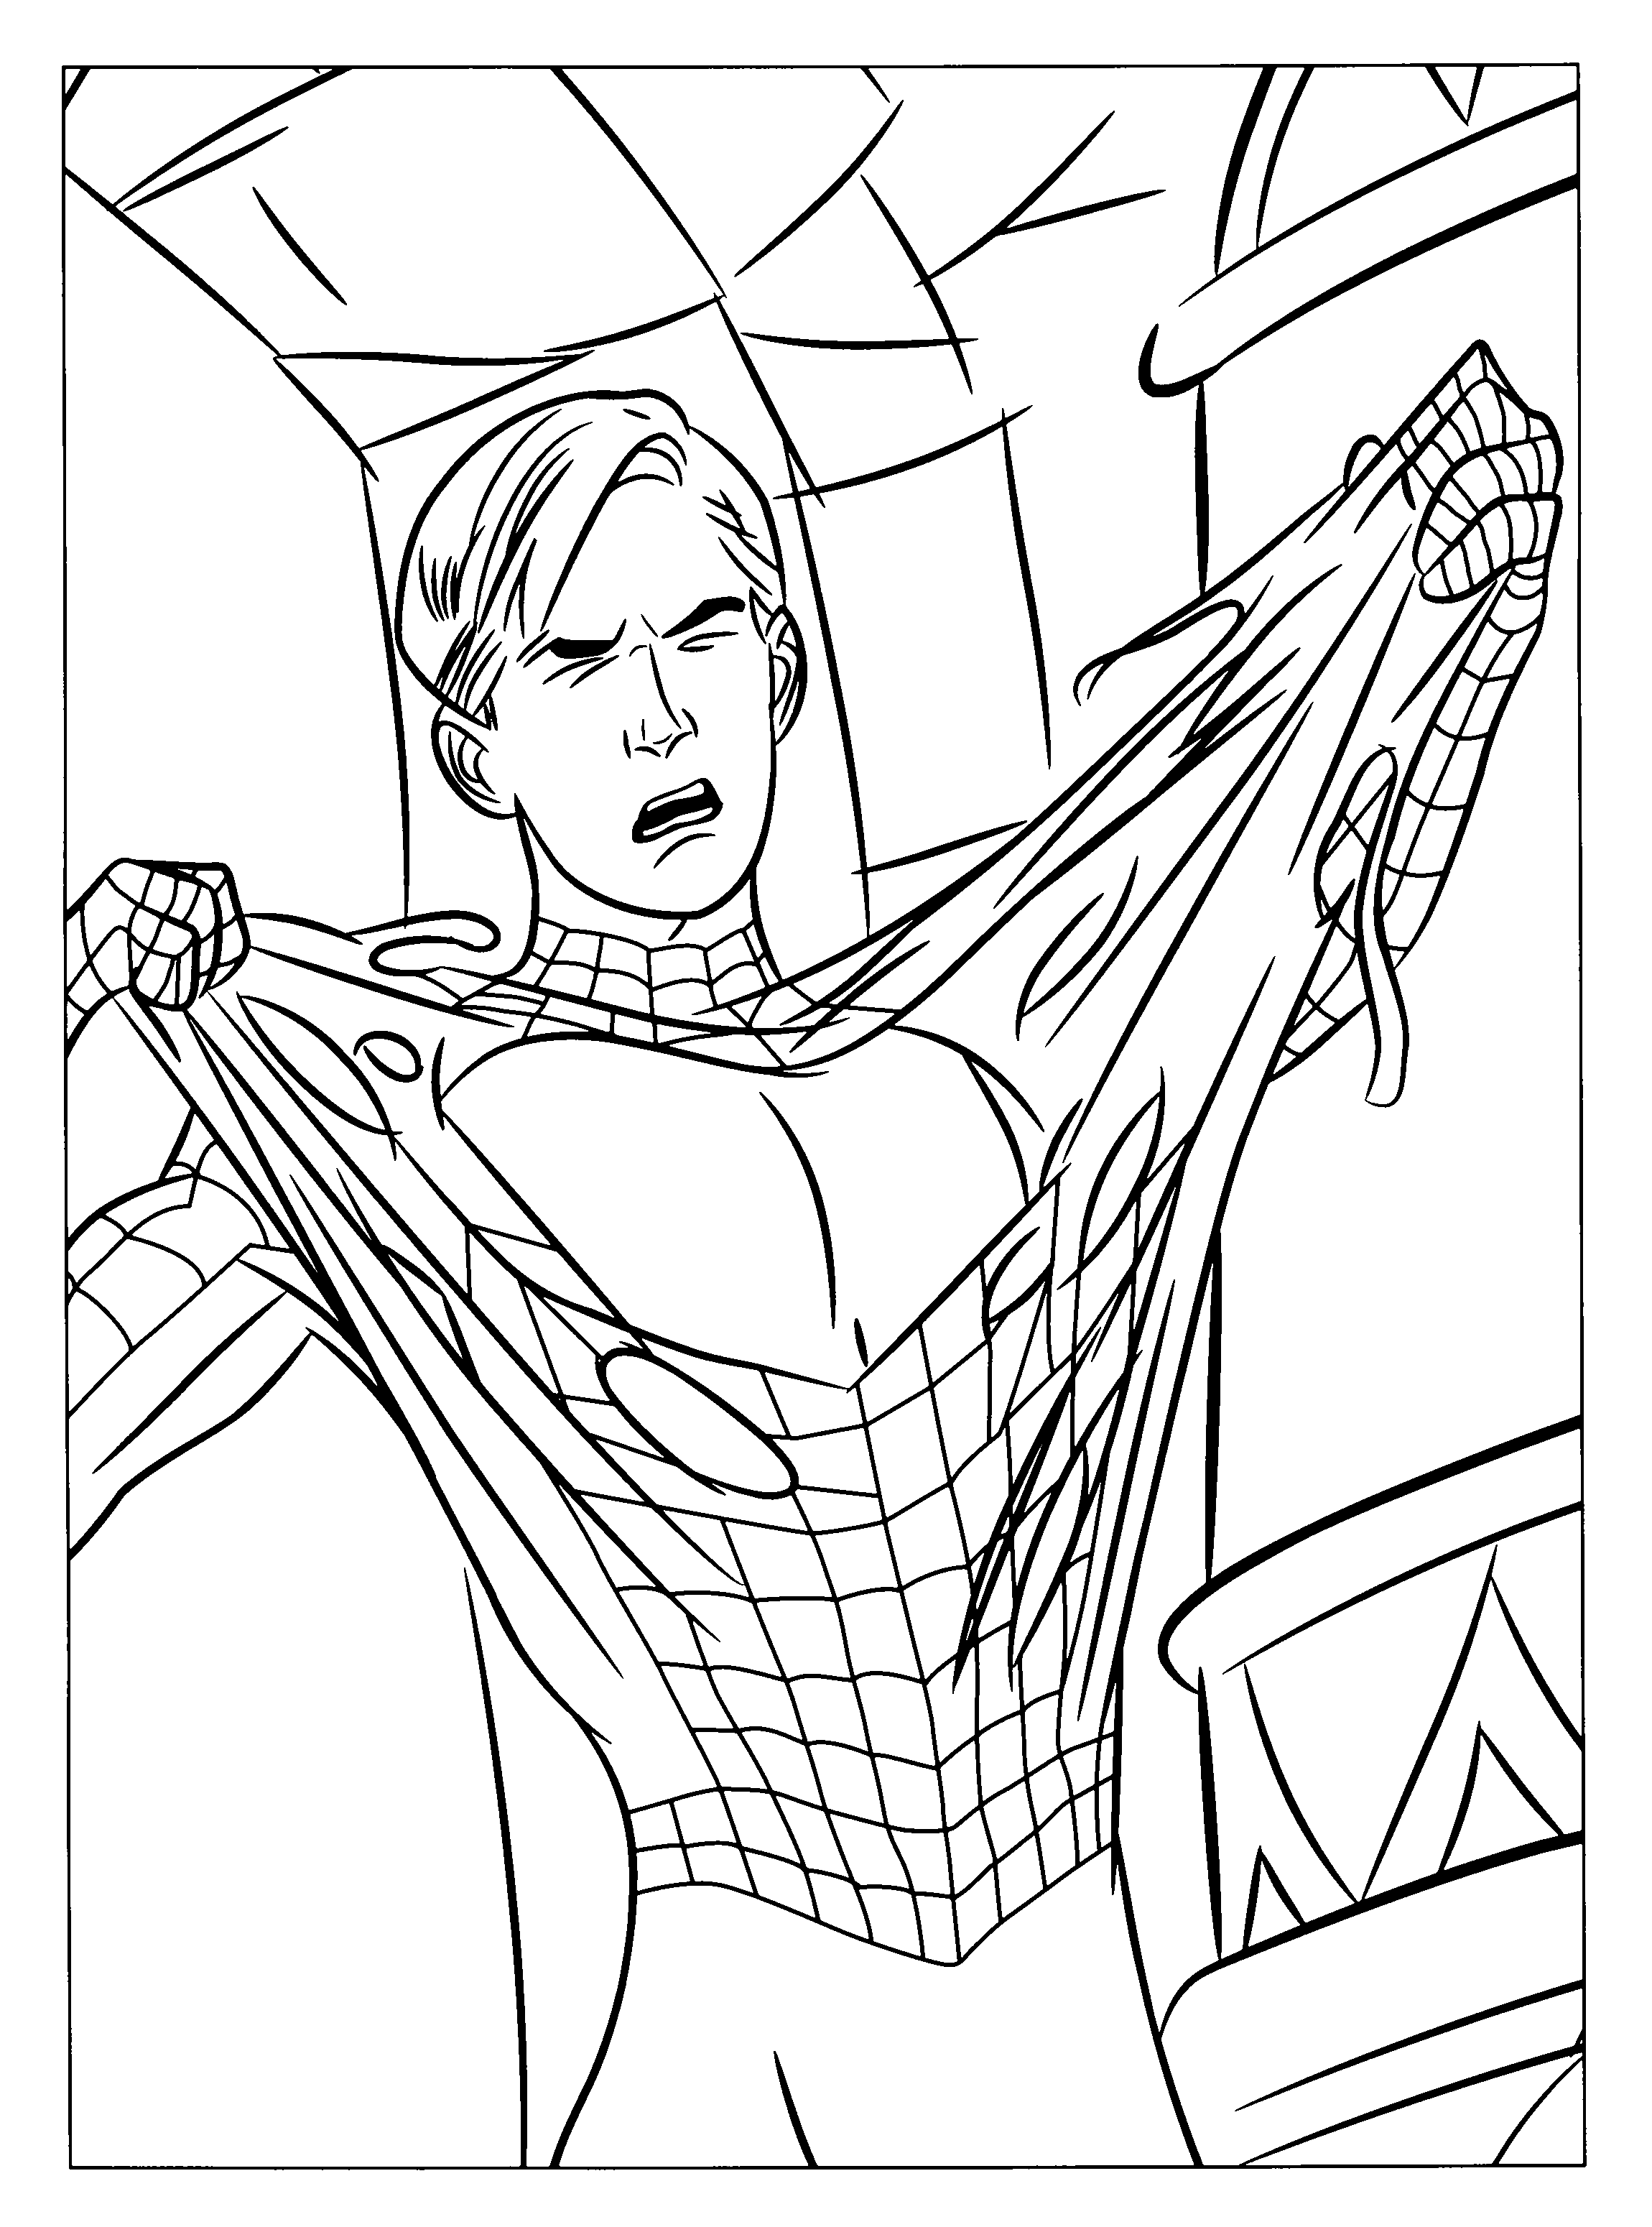 Spiderman 3 coloriages